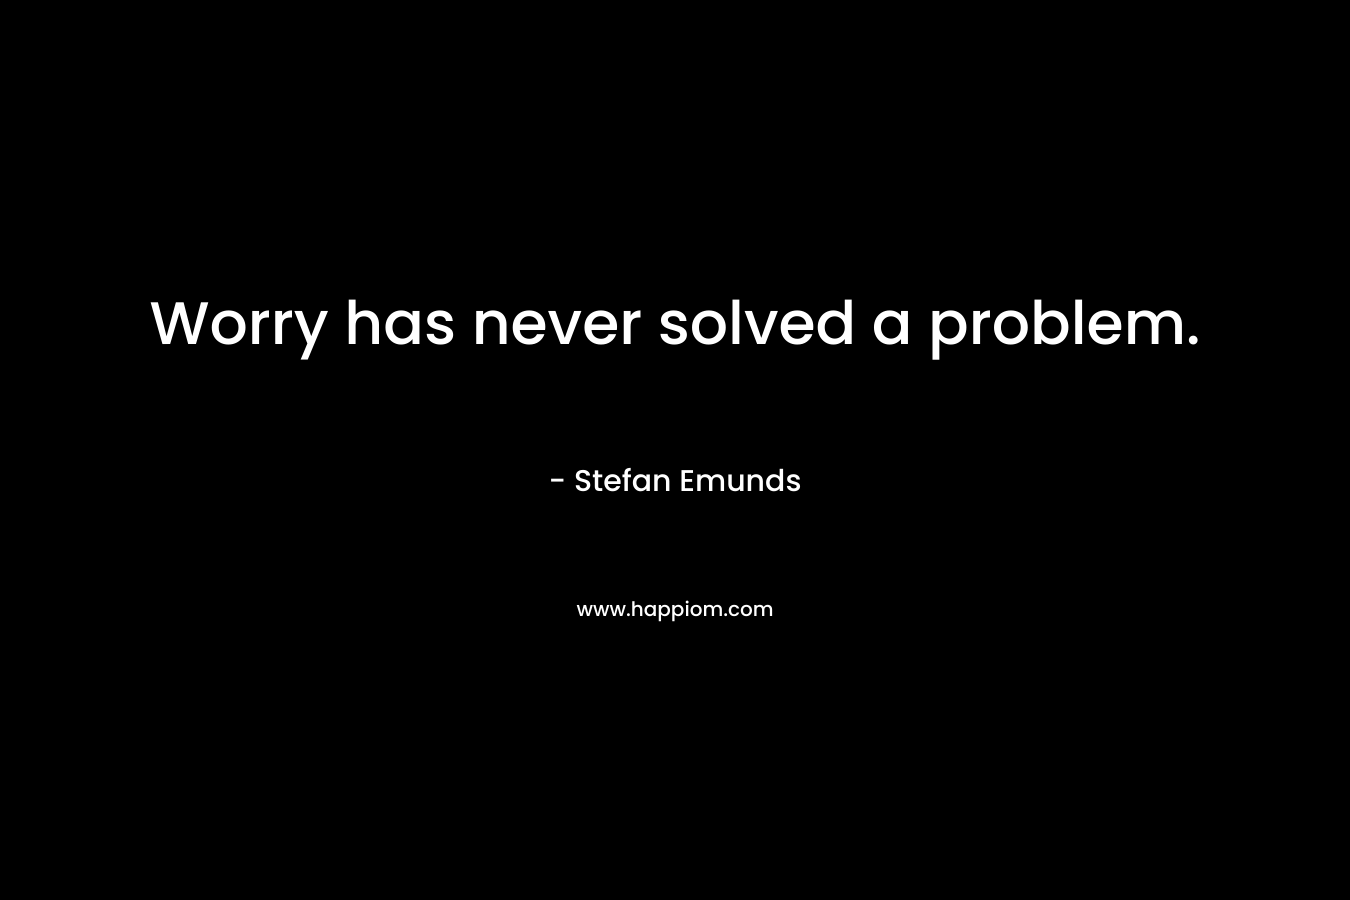 Worry has never solved a problem.